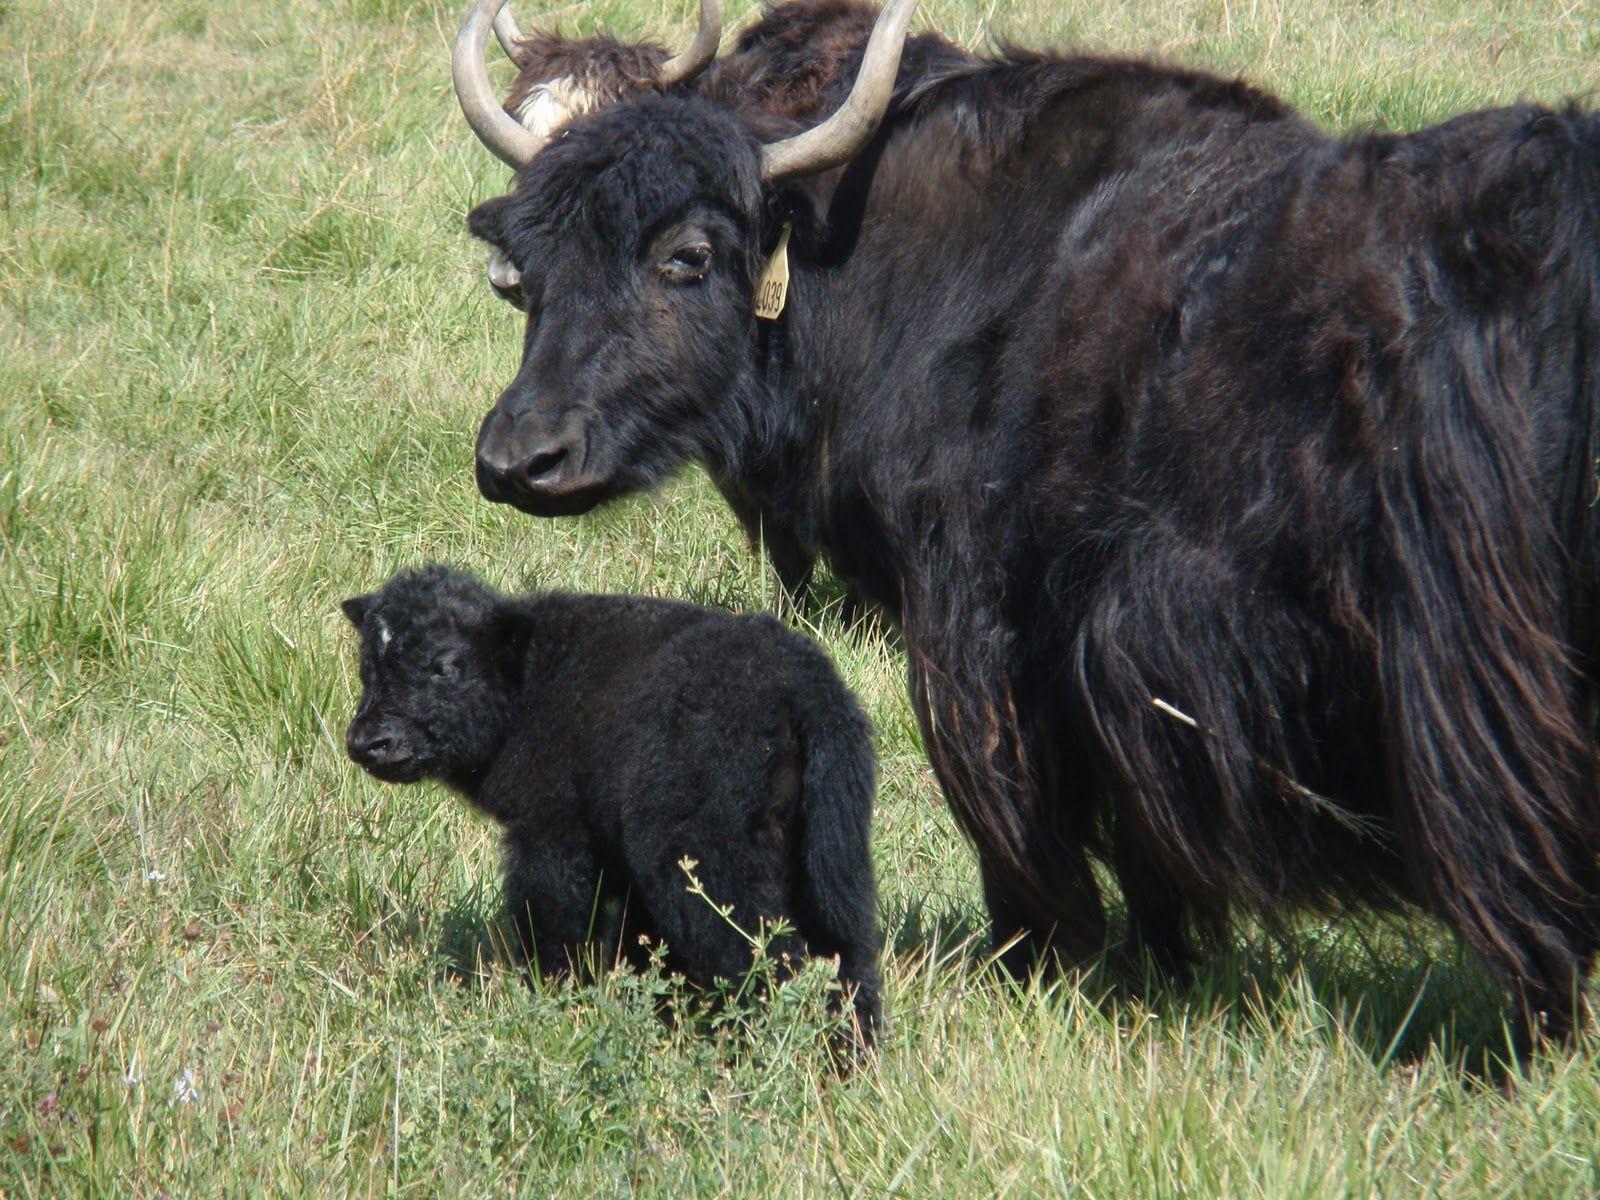 ENCYCLOPEDIA OF ANIMAL FACTS AND PICTURES: YAK